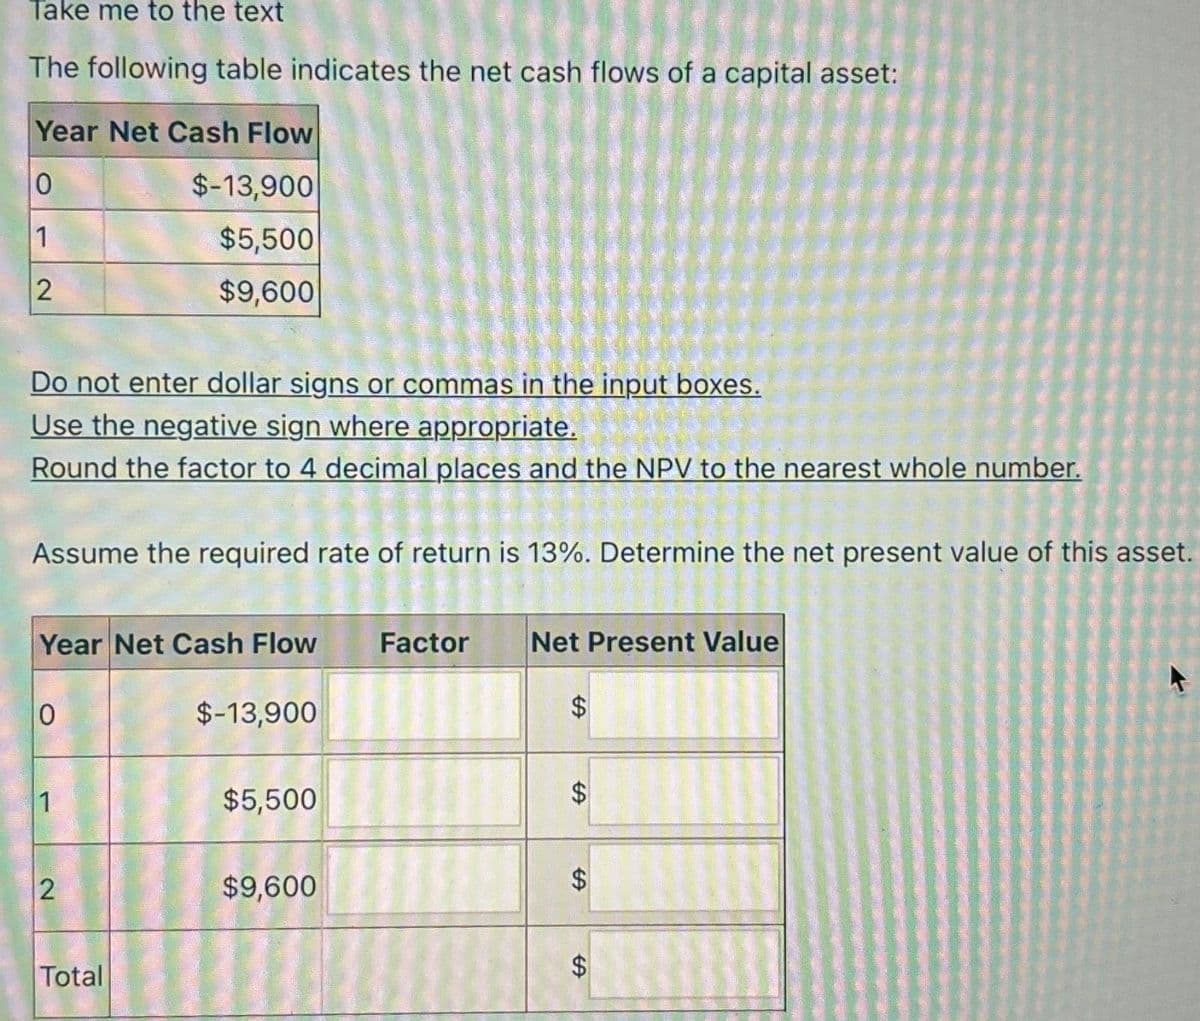 Take me to the text
The following table indicates the net cash flows of a capital asset:
Year Net Cash Flow
0
$-13,900
1
$5,500
2
$9,600
Do not enter dollar signs or commas in the input boxes.
Use the negative sign where appropriate.
Round the factor to 4 decimal places and the NPV to the nearest whole number.
Assume the required rate of return is 13%. Determine the net present value of this asset.
Year Net Cash Flow
0
1
2
Total
$-13,900
$5,500
$9,600
Factor Net Present Value
SA
$
A